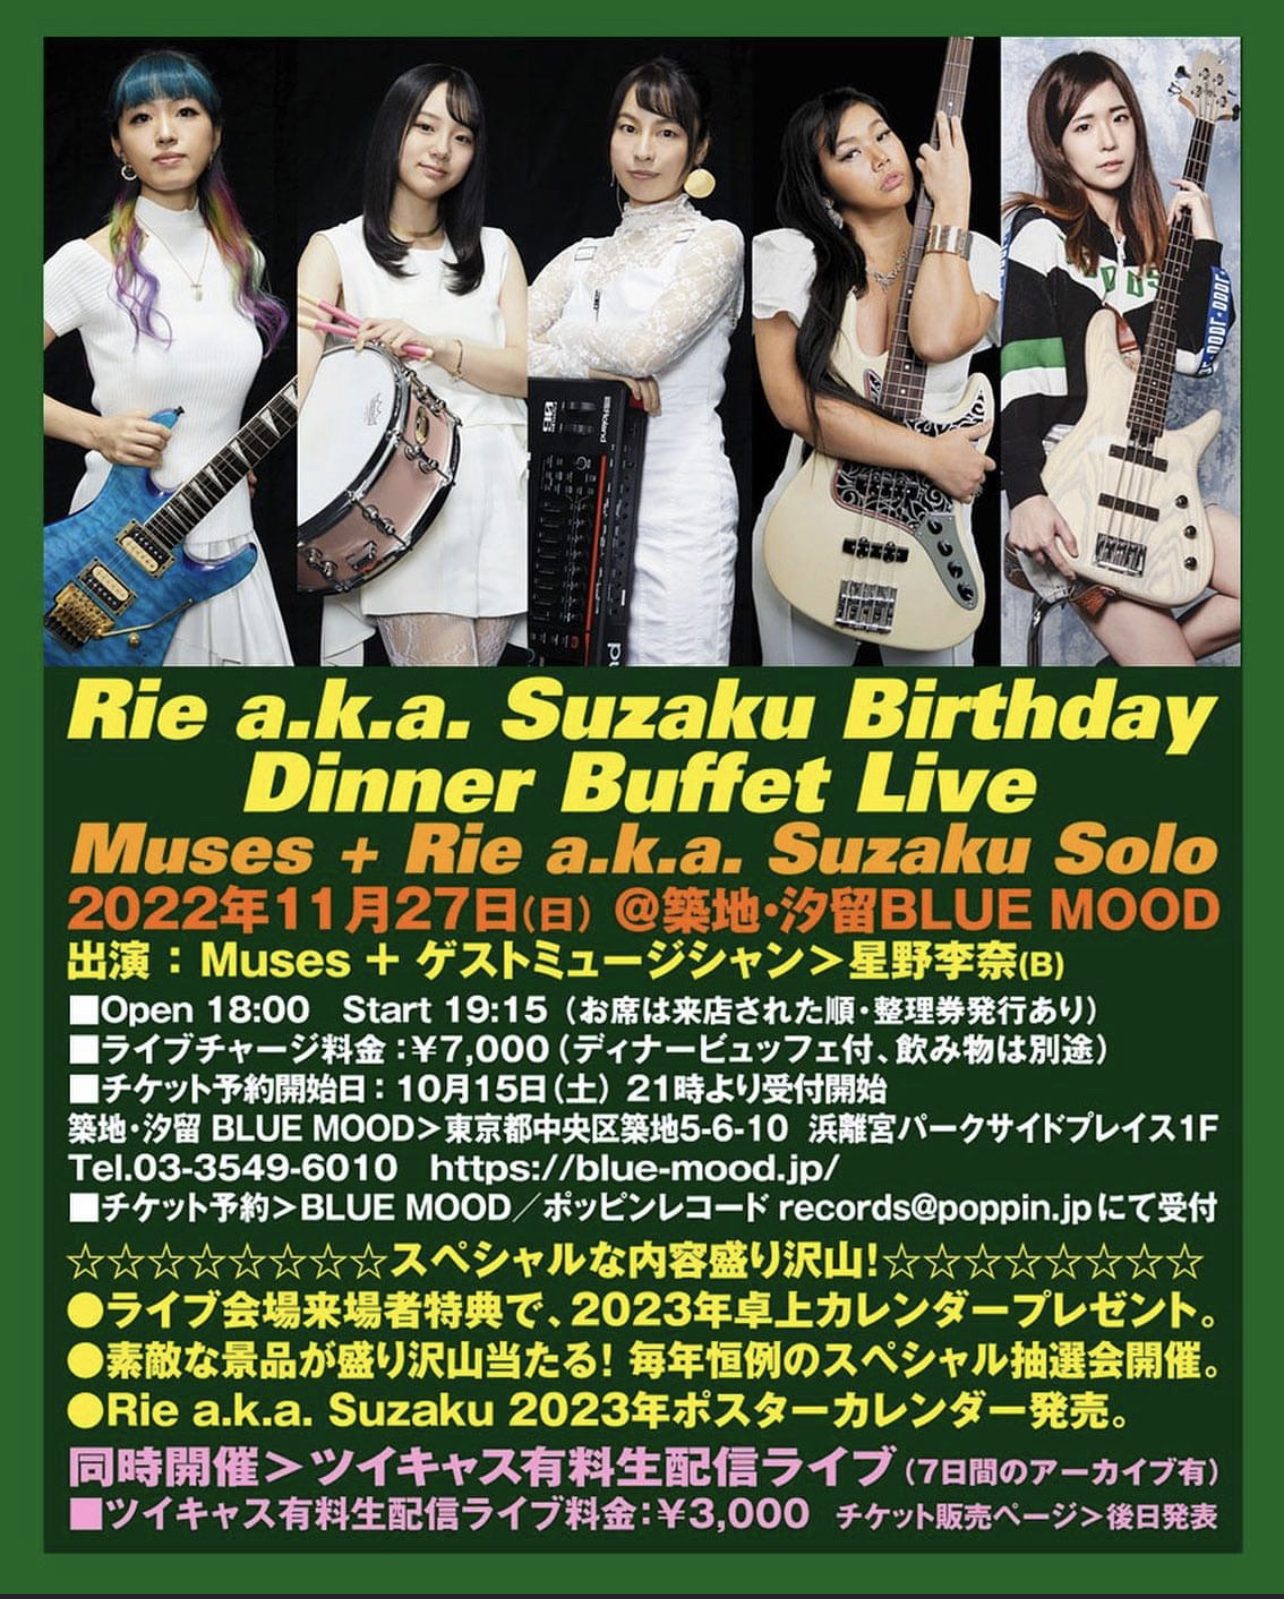 Rie a.k.a. Suzaku Birthday Dinner Buffet Live Muses + Rie a.k.a. Suzaku Solo